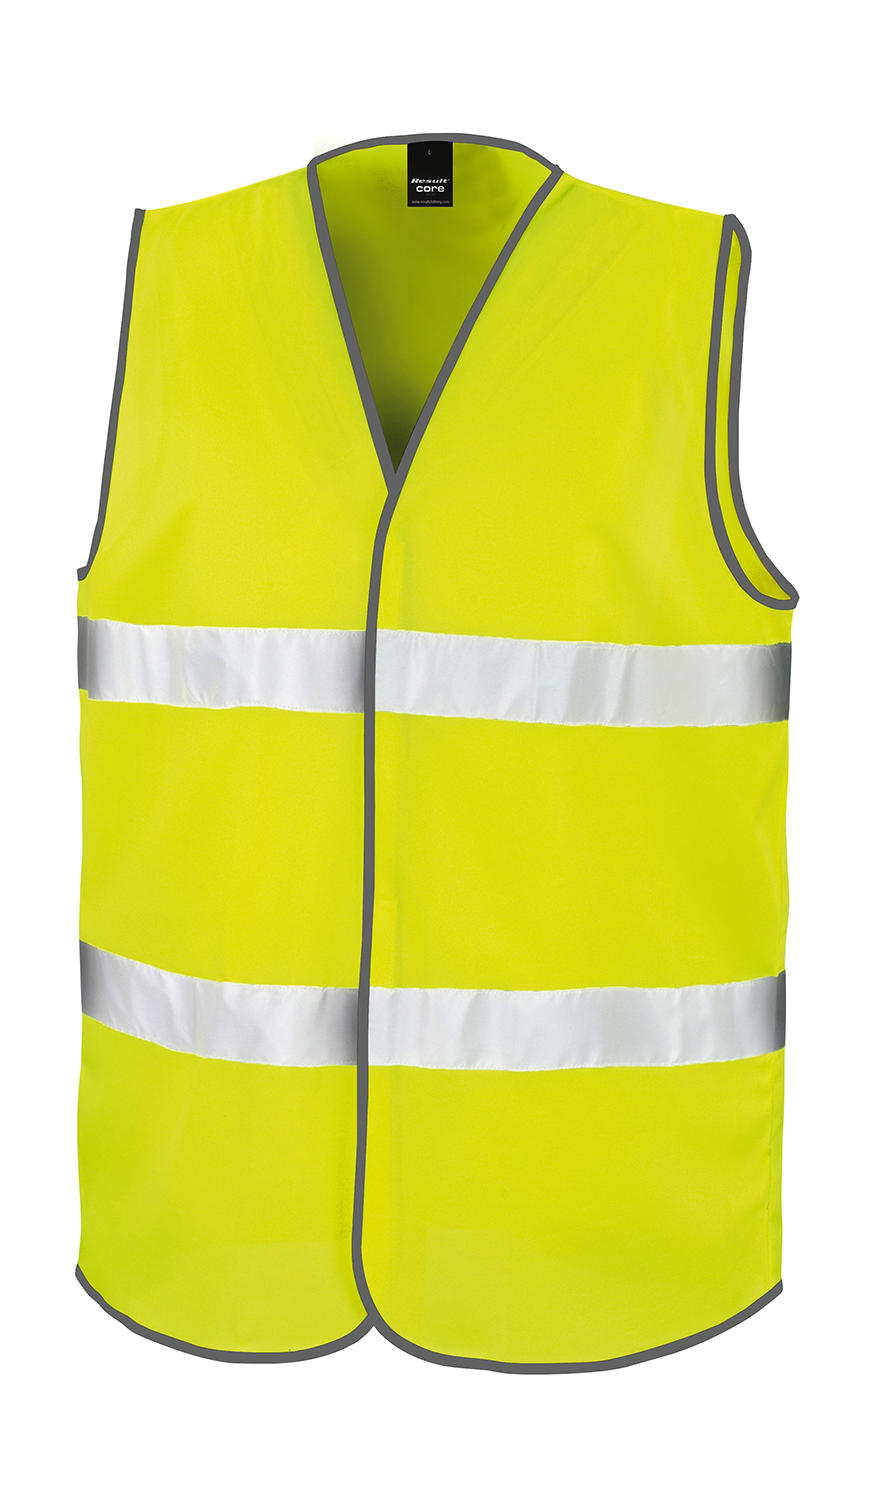  Core Enhanced Visibility Vest in Farbe Fluorescent Yellow